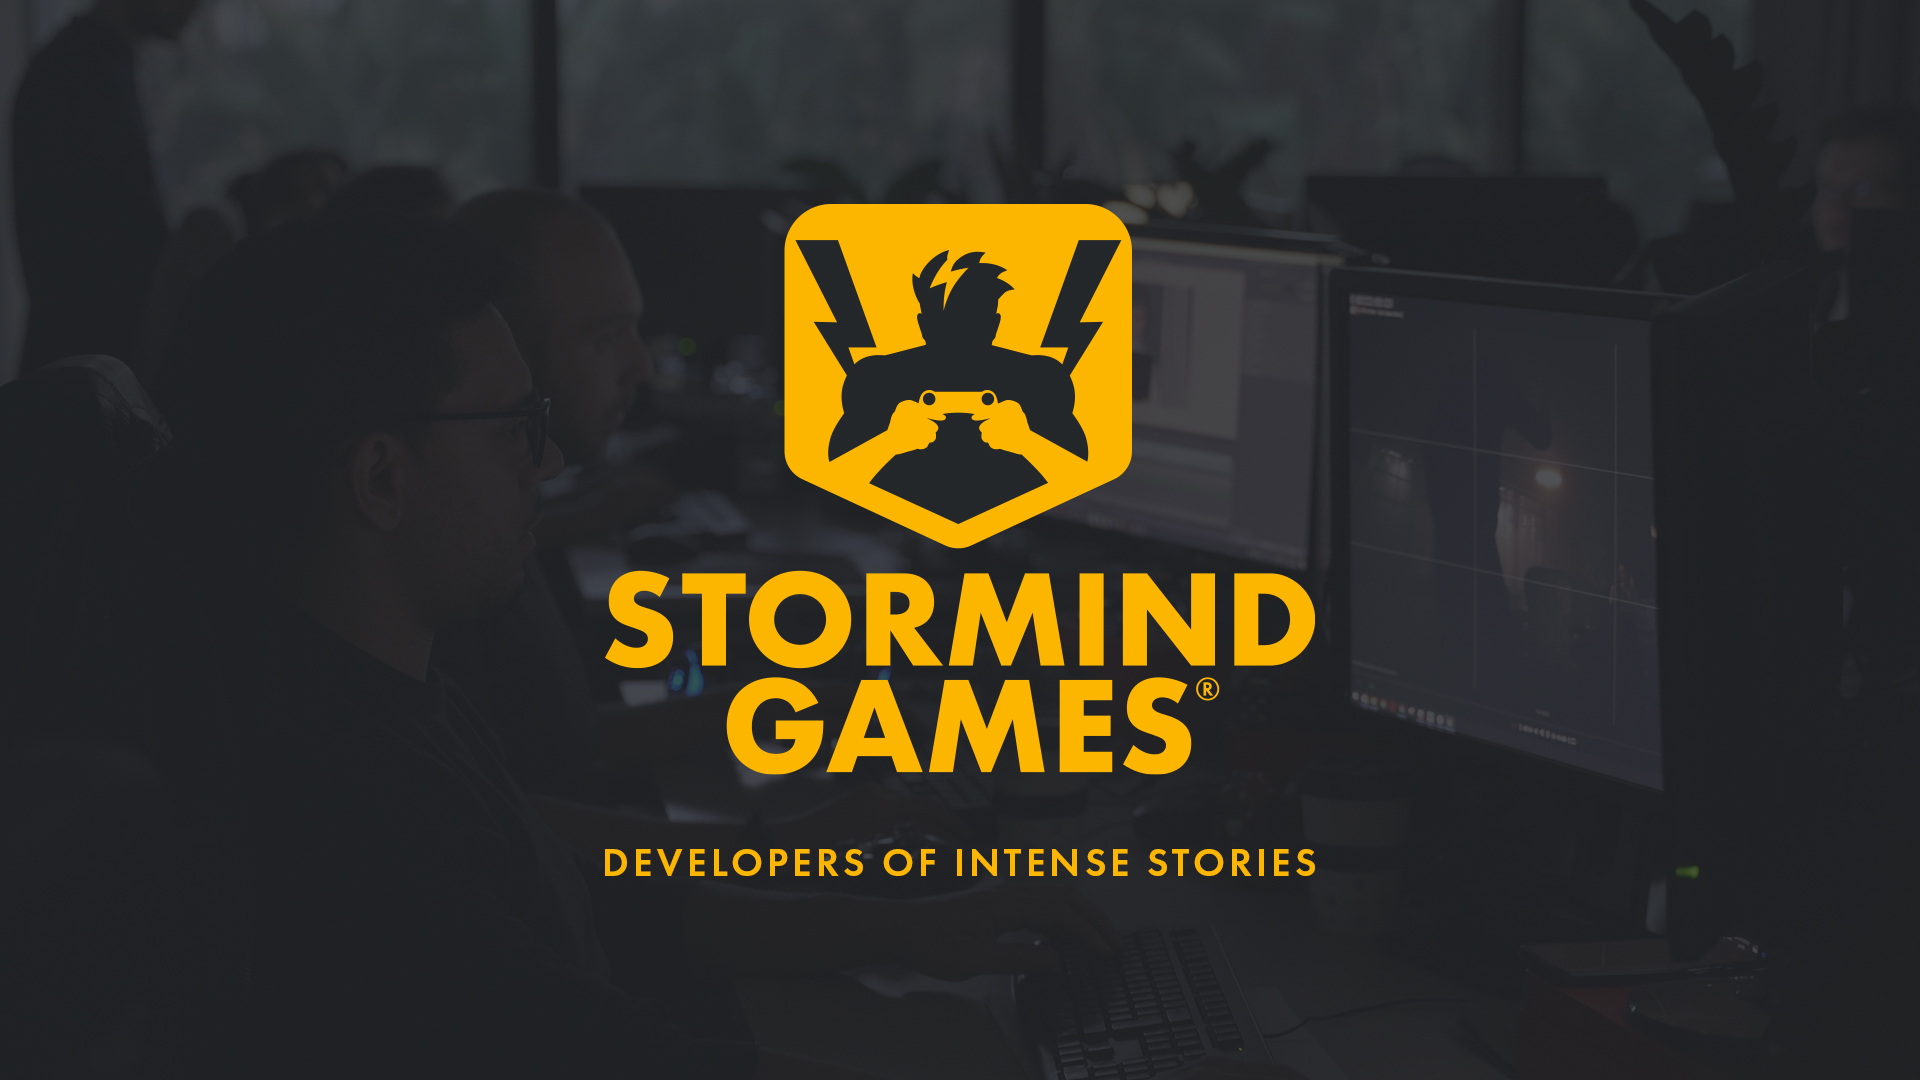 We present to you our new brand identity – and our new video game!